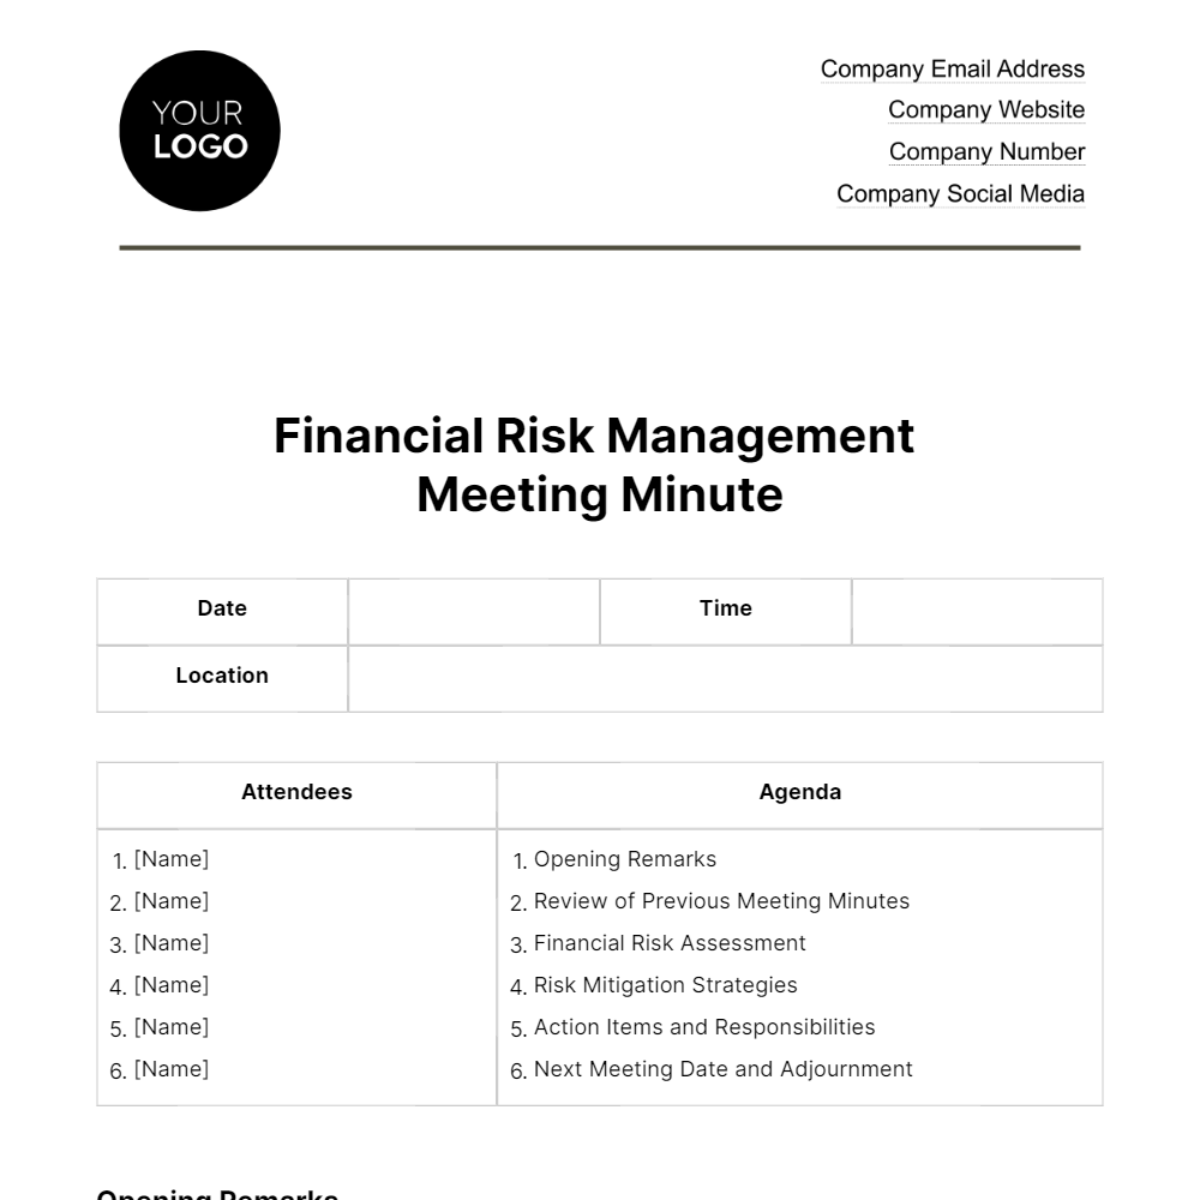 Free Financial Risk Management Meeting Minute Template